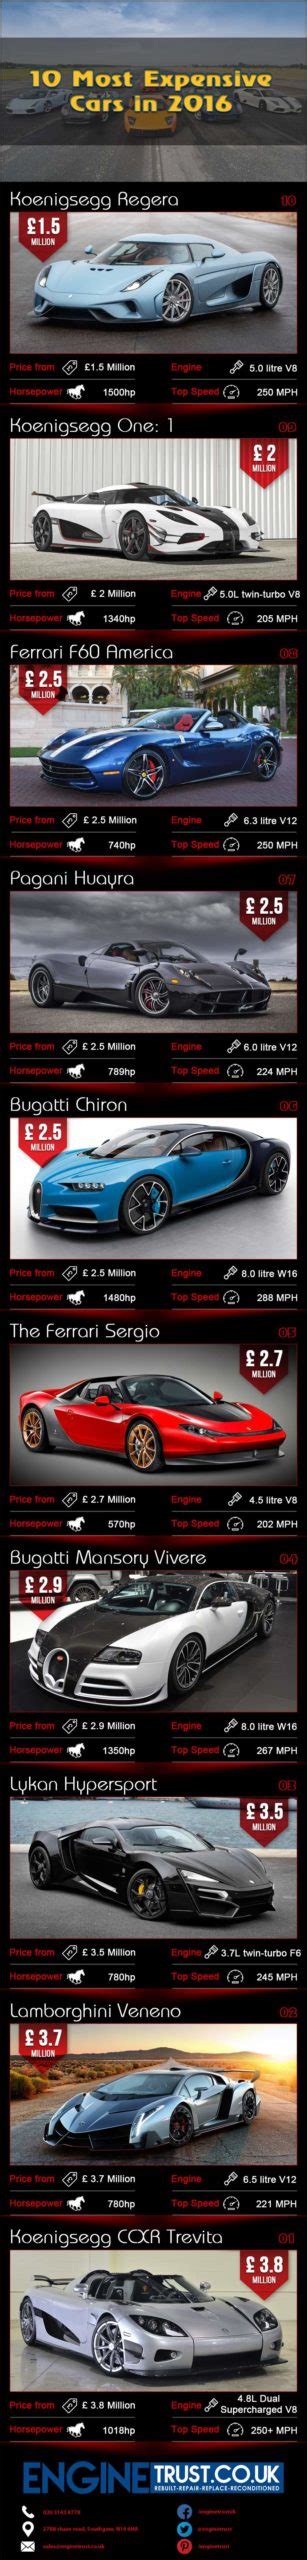 expensive cars   love infographics